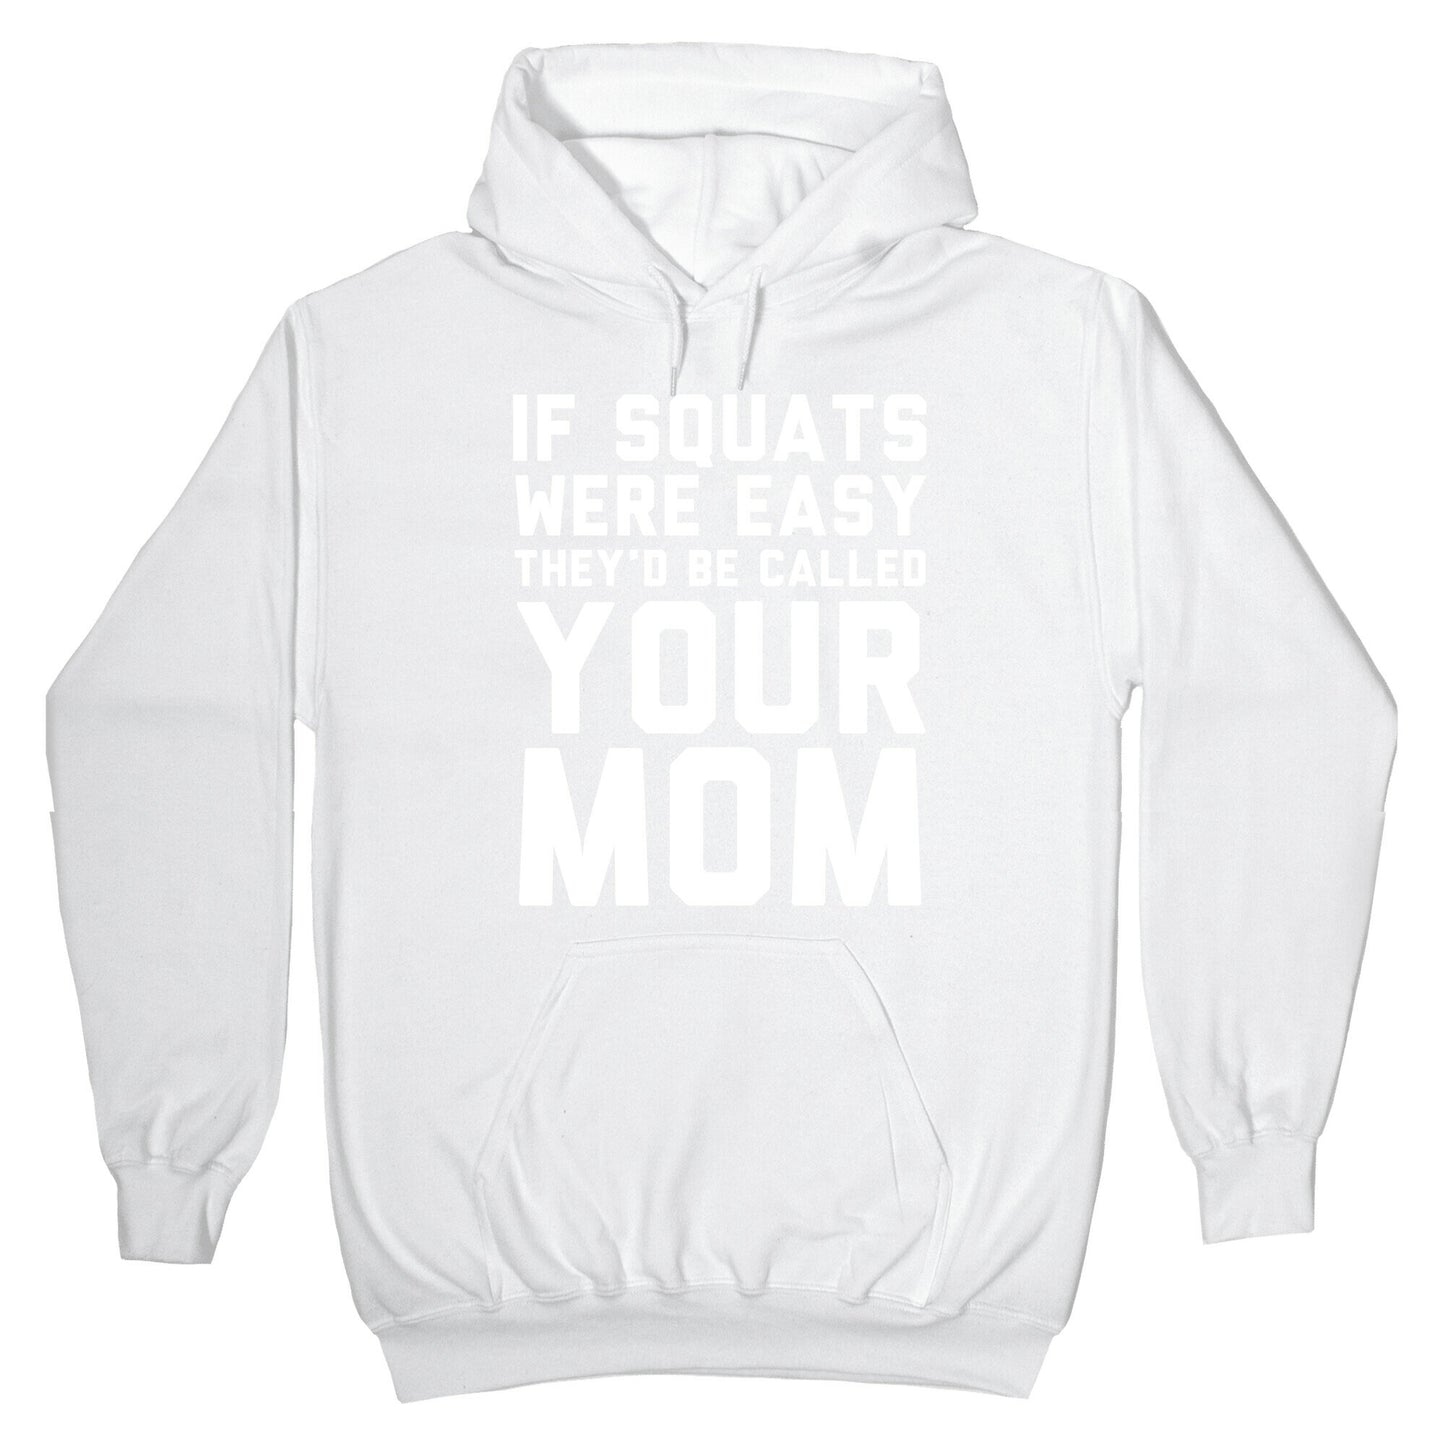 If Squats Were Easy Hoodie